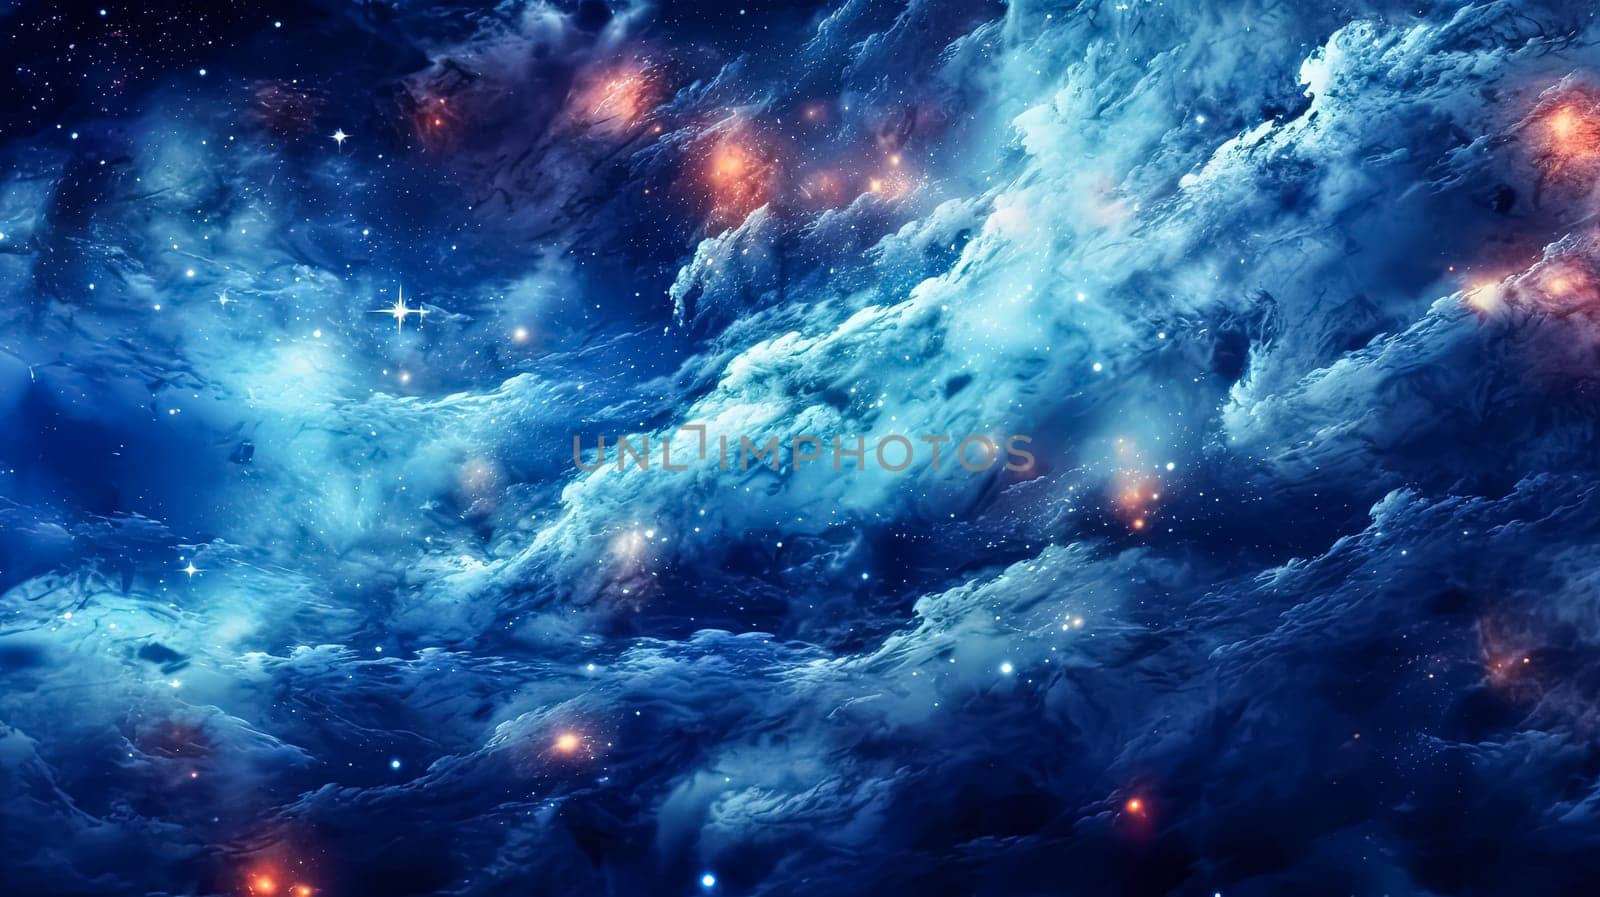 A serene blue and white scene with stars and clouds, creating a dreamy and celestial atmosphere. Perfect for evoking a sense of wonder and tranquility.